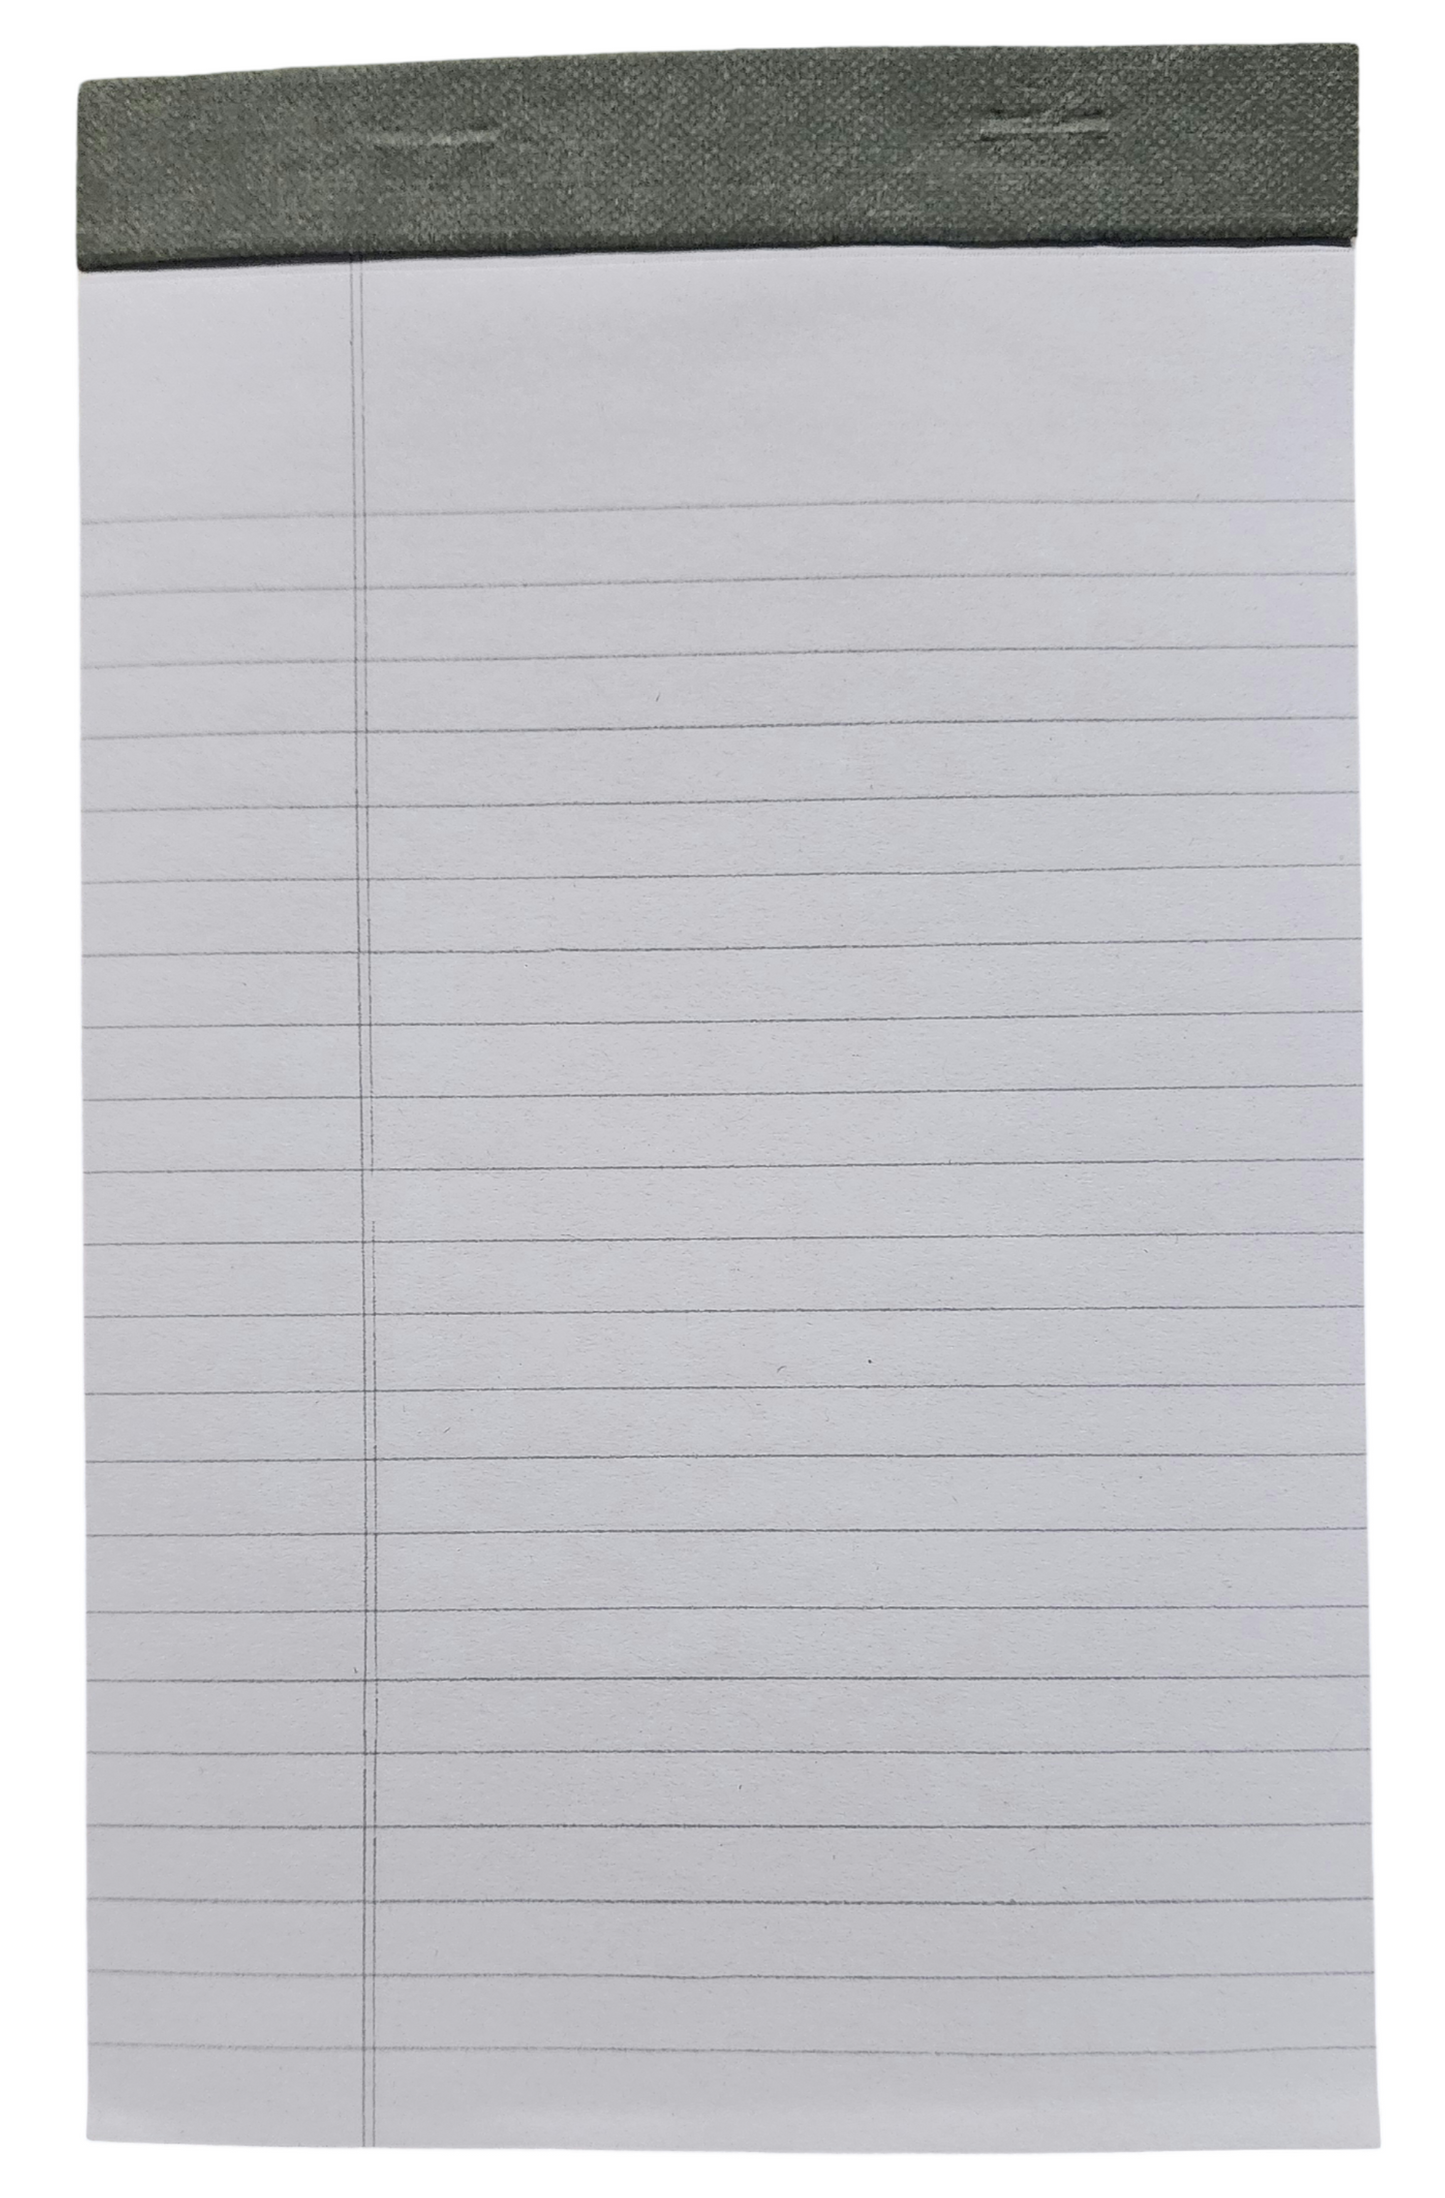 •	Includes 35 boxes, each containing 192 note pads * Ideal for reselling or stocking up your own office * High-quality 30-sheet note pads, perfect for school or work